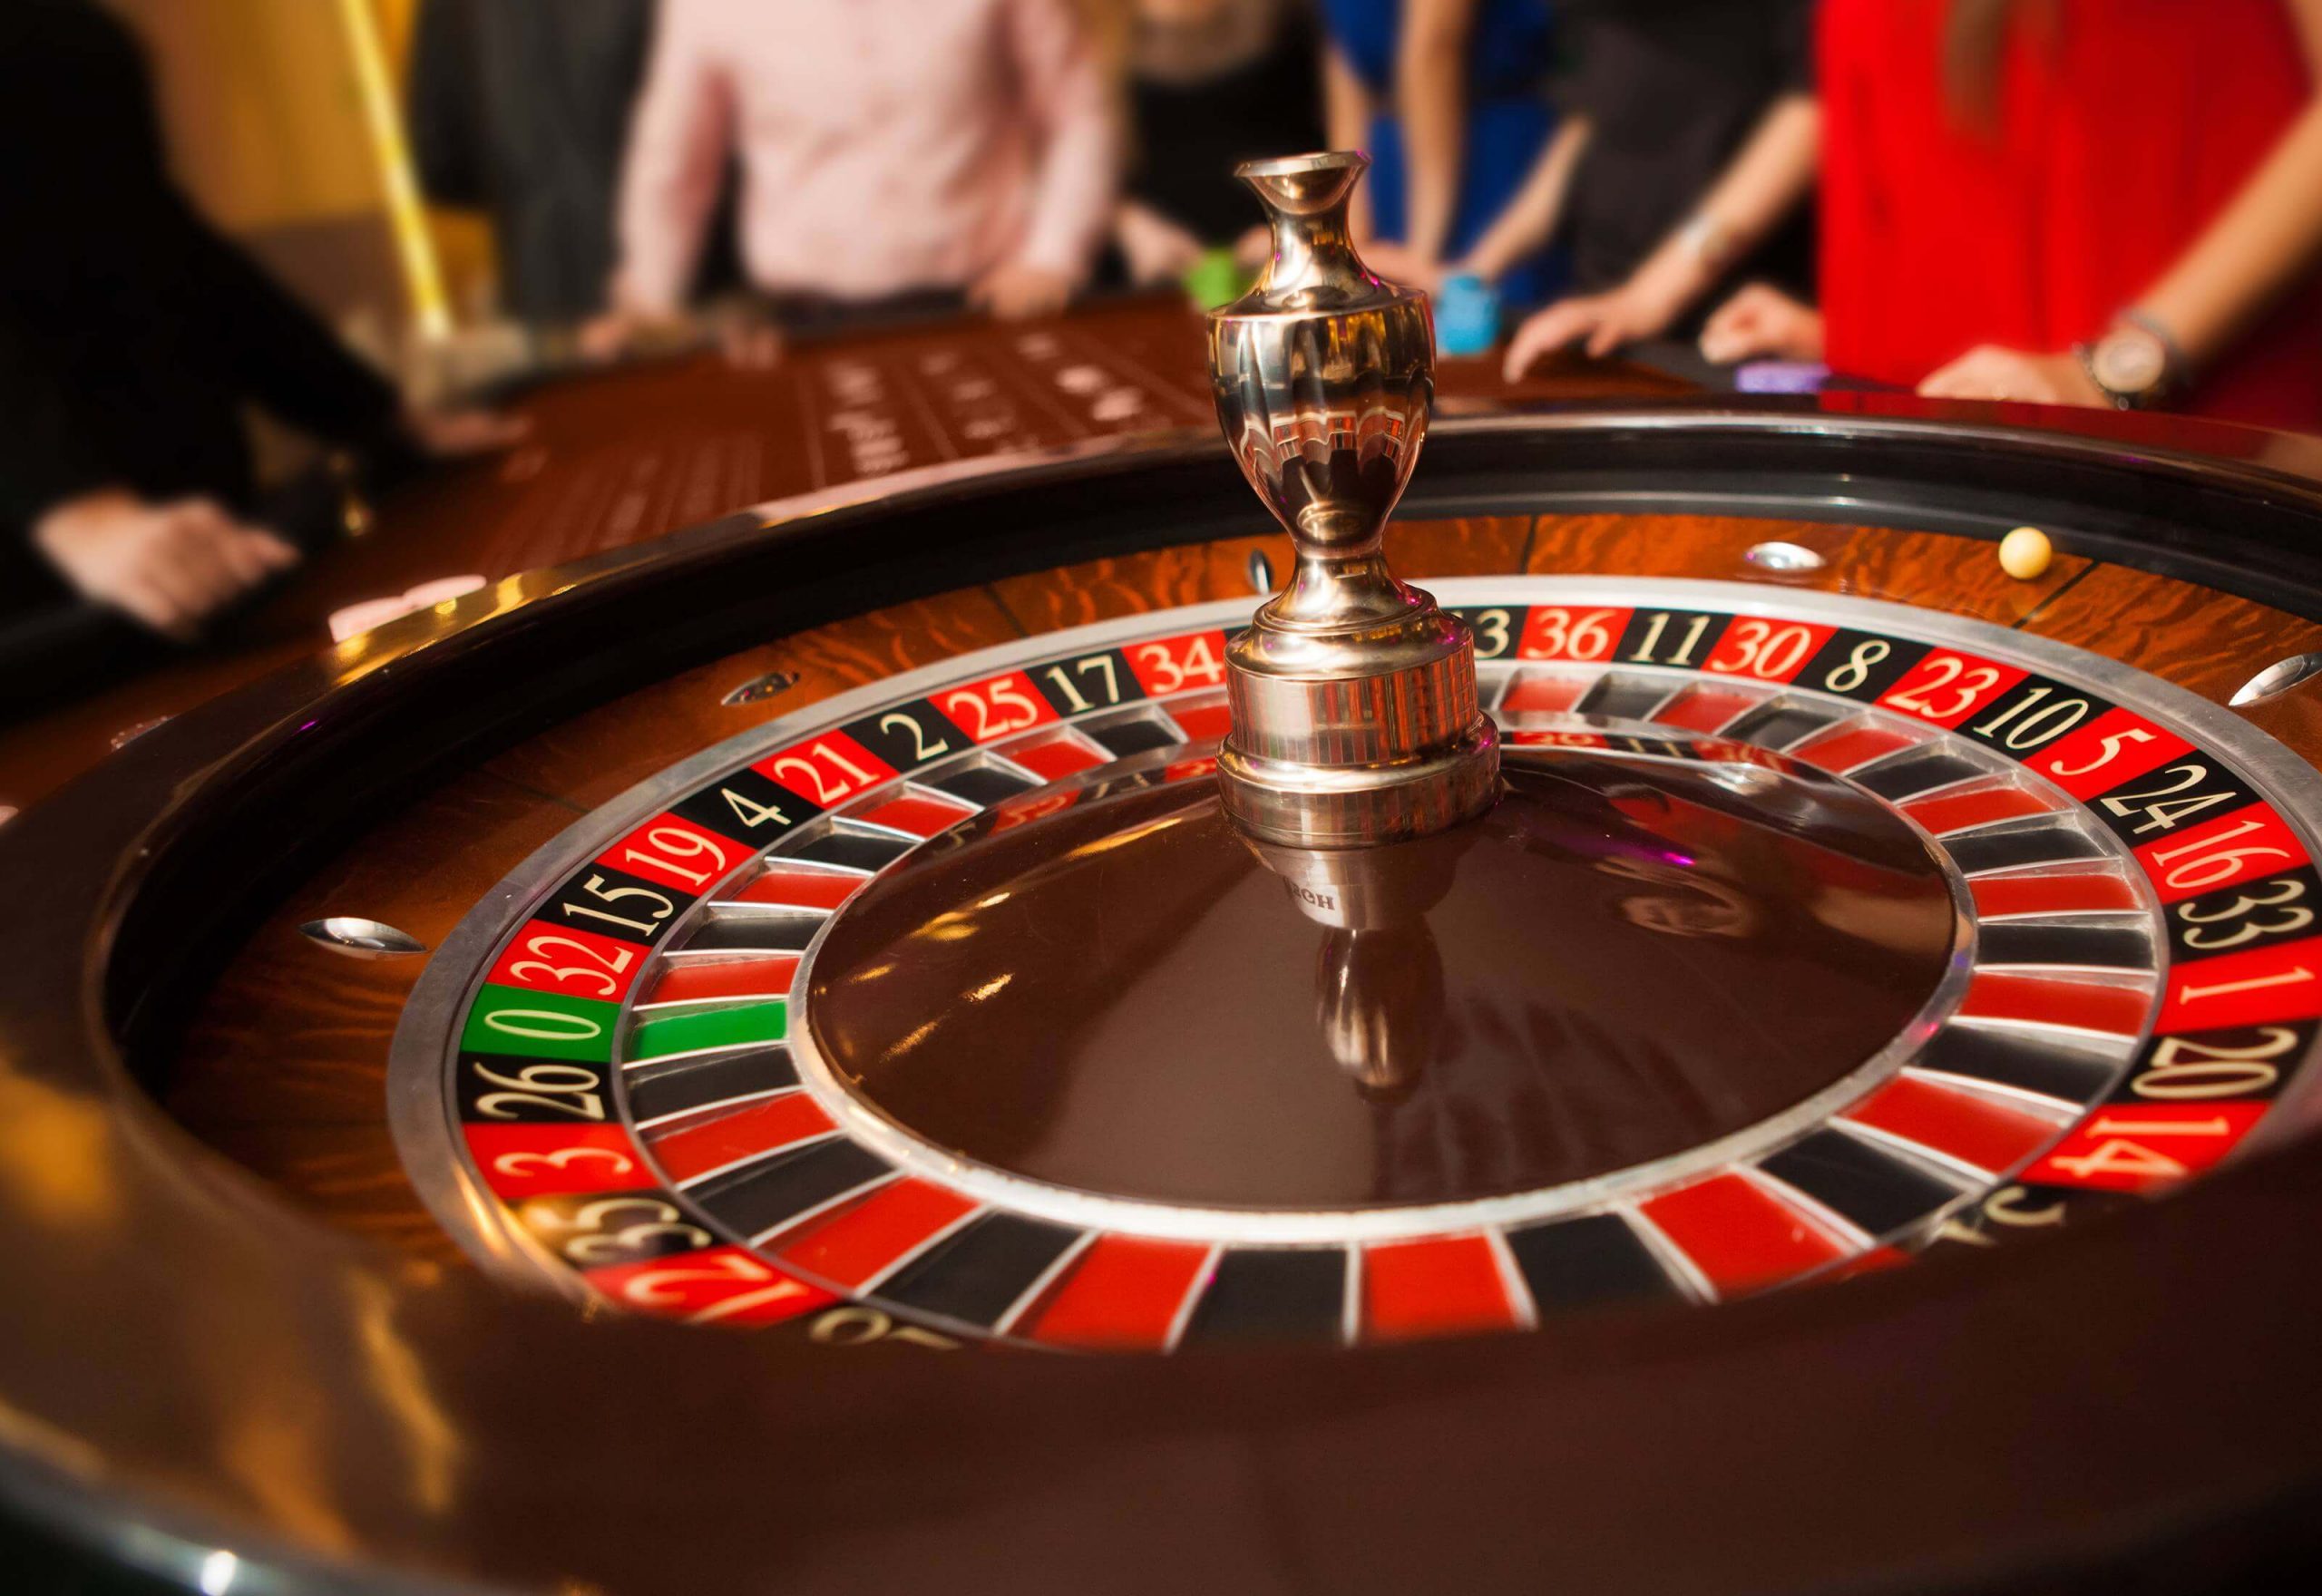 What Are the Three Most Popular Online Casino Games?